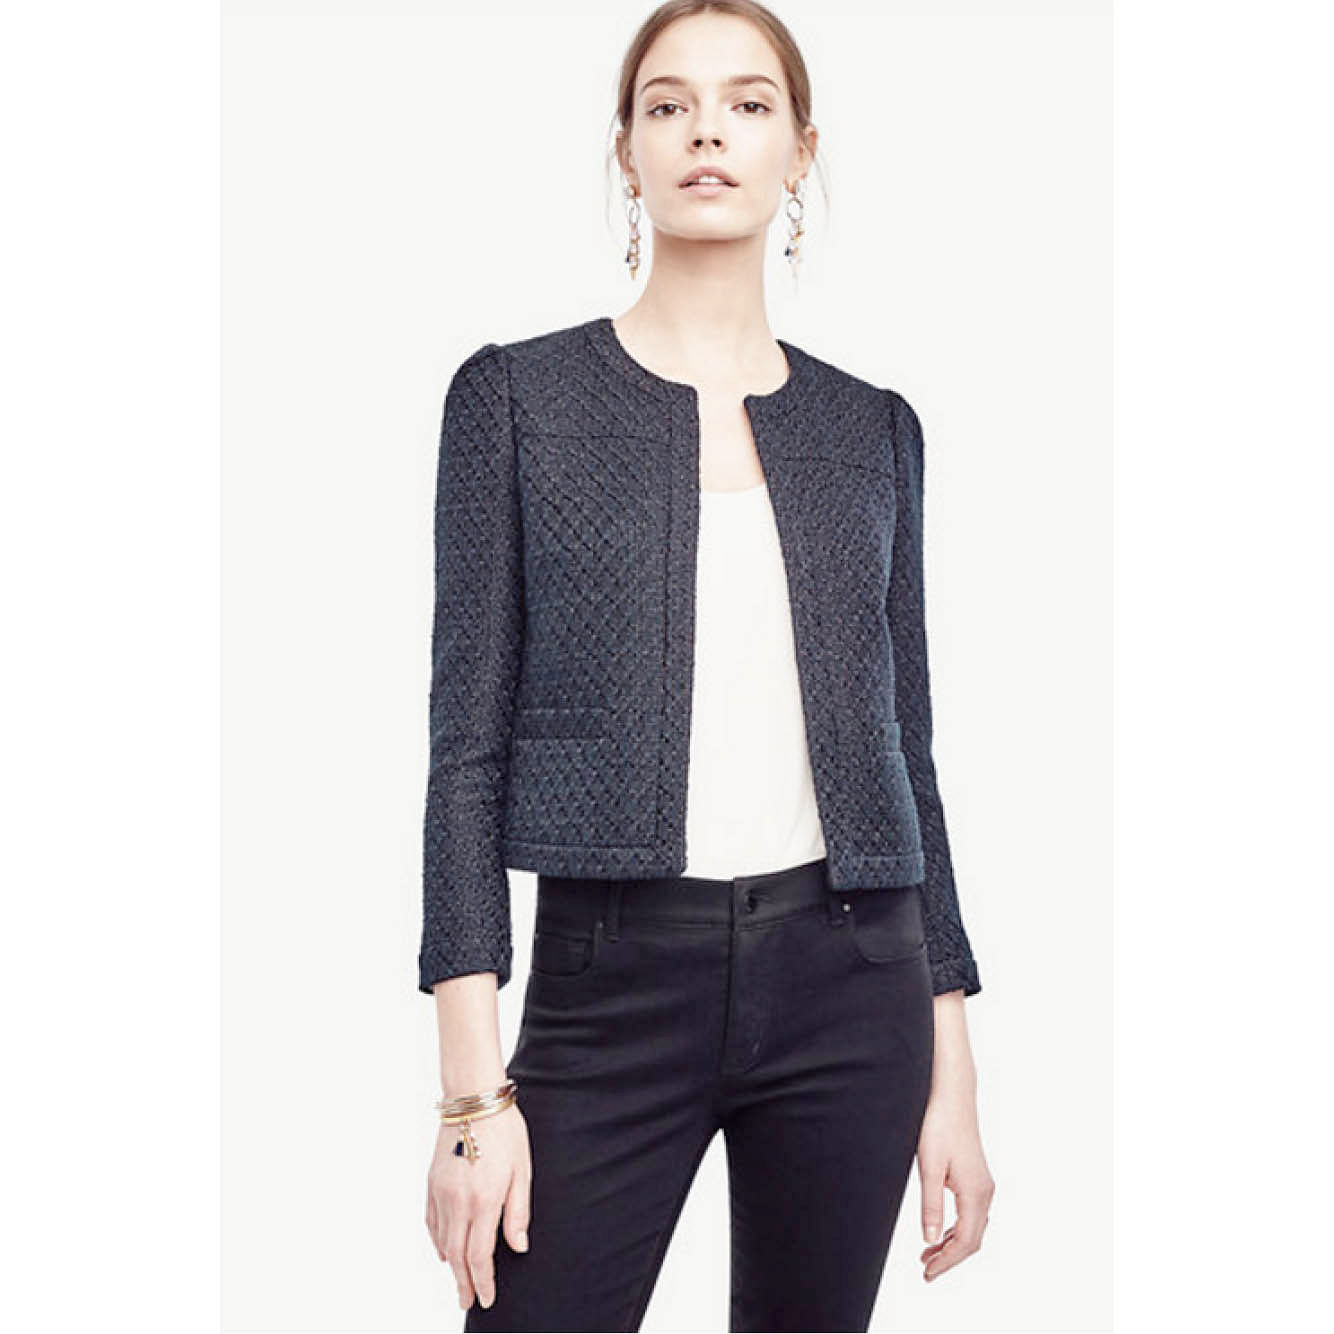 Petite Tweed Open Jacket, $201.10, from www.anntaylor.com